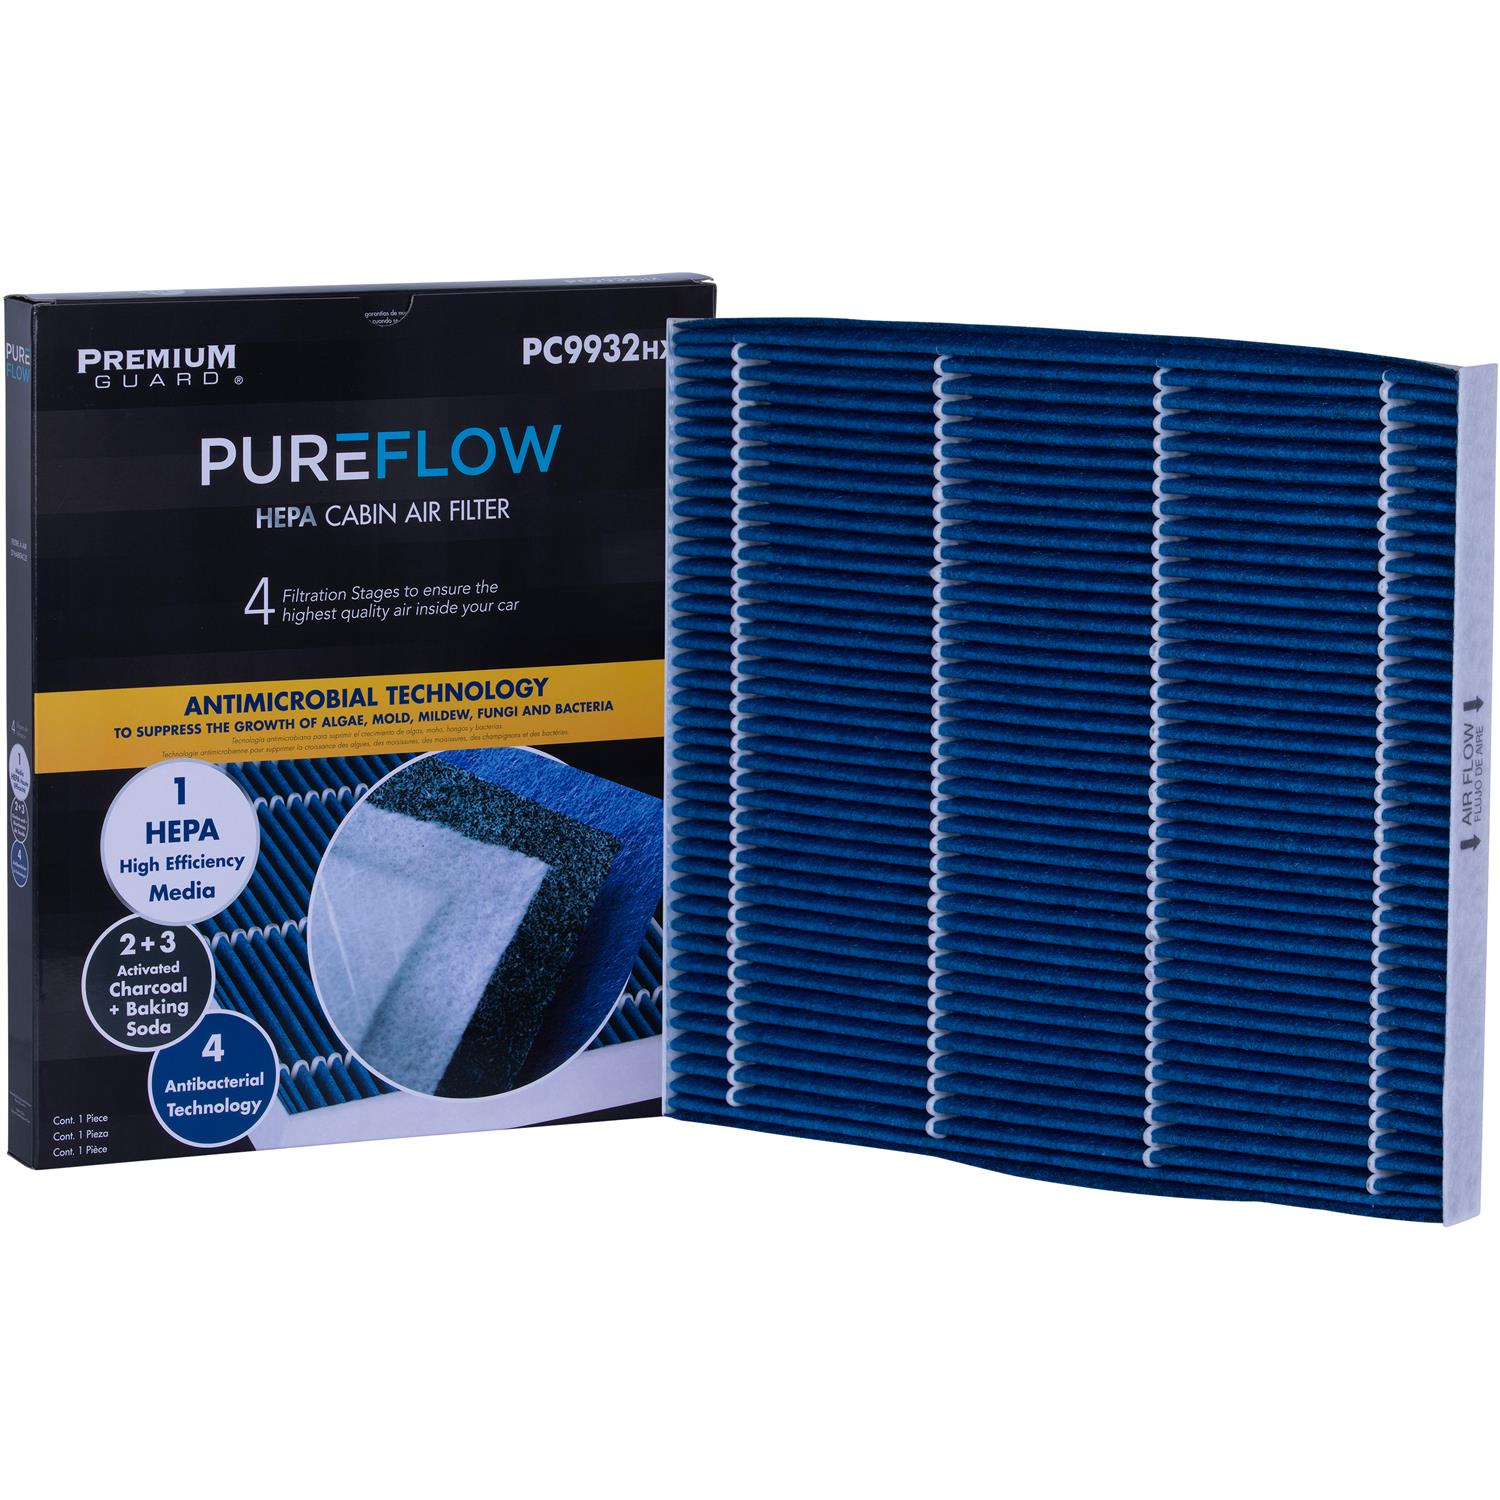 PUREFLOW 2017 Nissan Maxima Cabin Air Filter with HEPA and Antibacterial Technology, PC9932HX